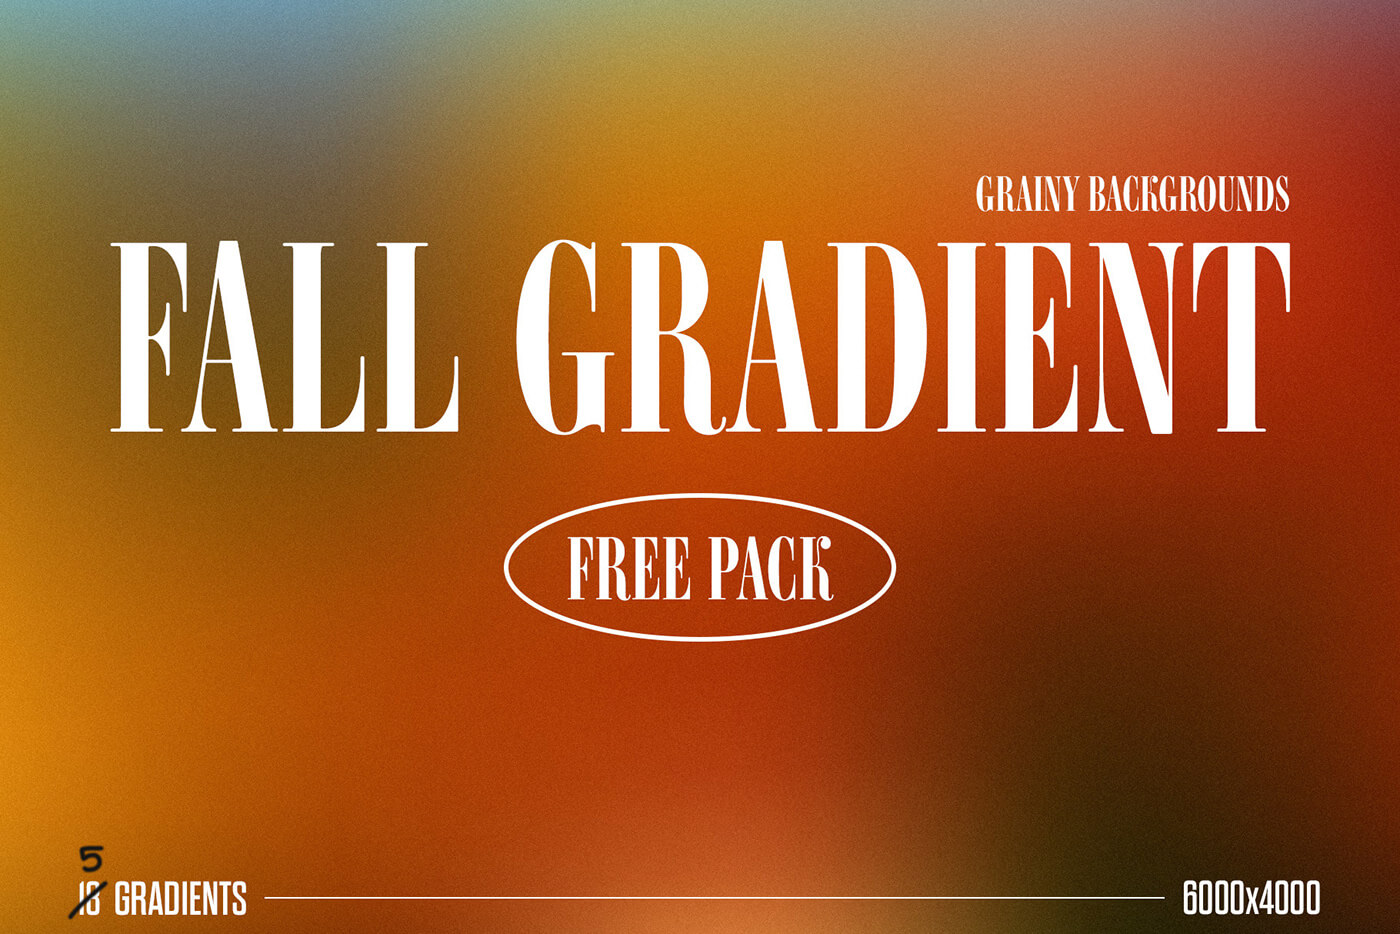 Fall Gradient Grainy Backgrounds | Free Download